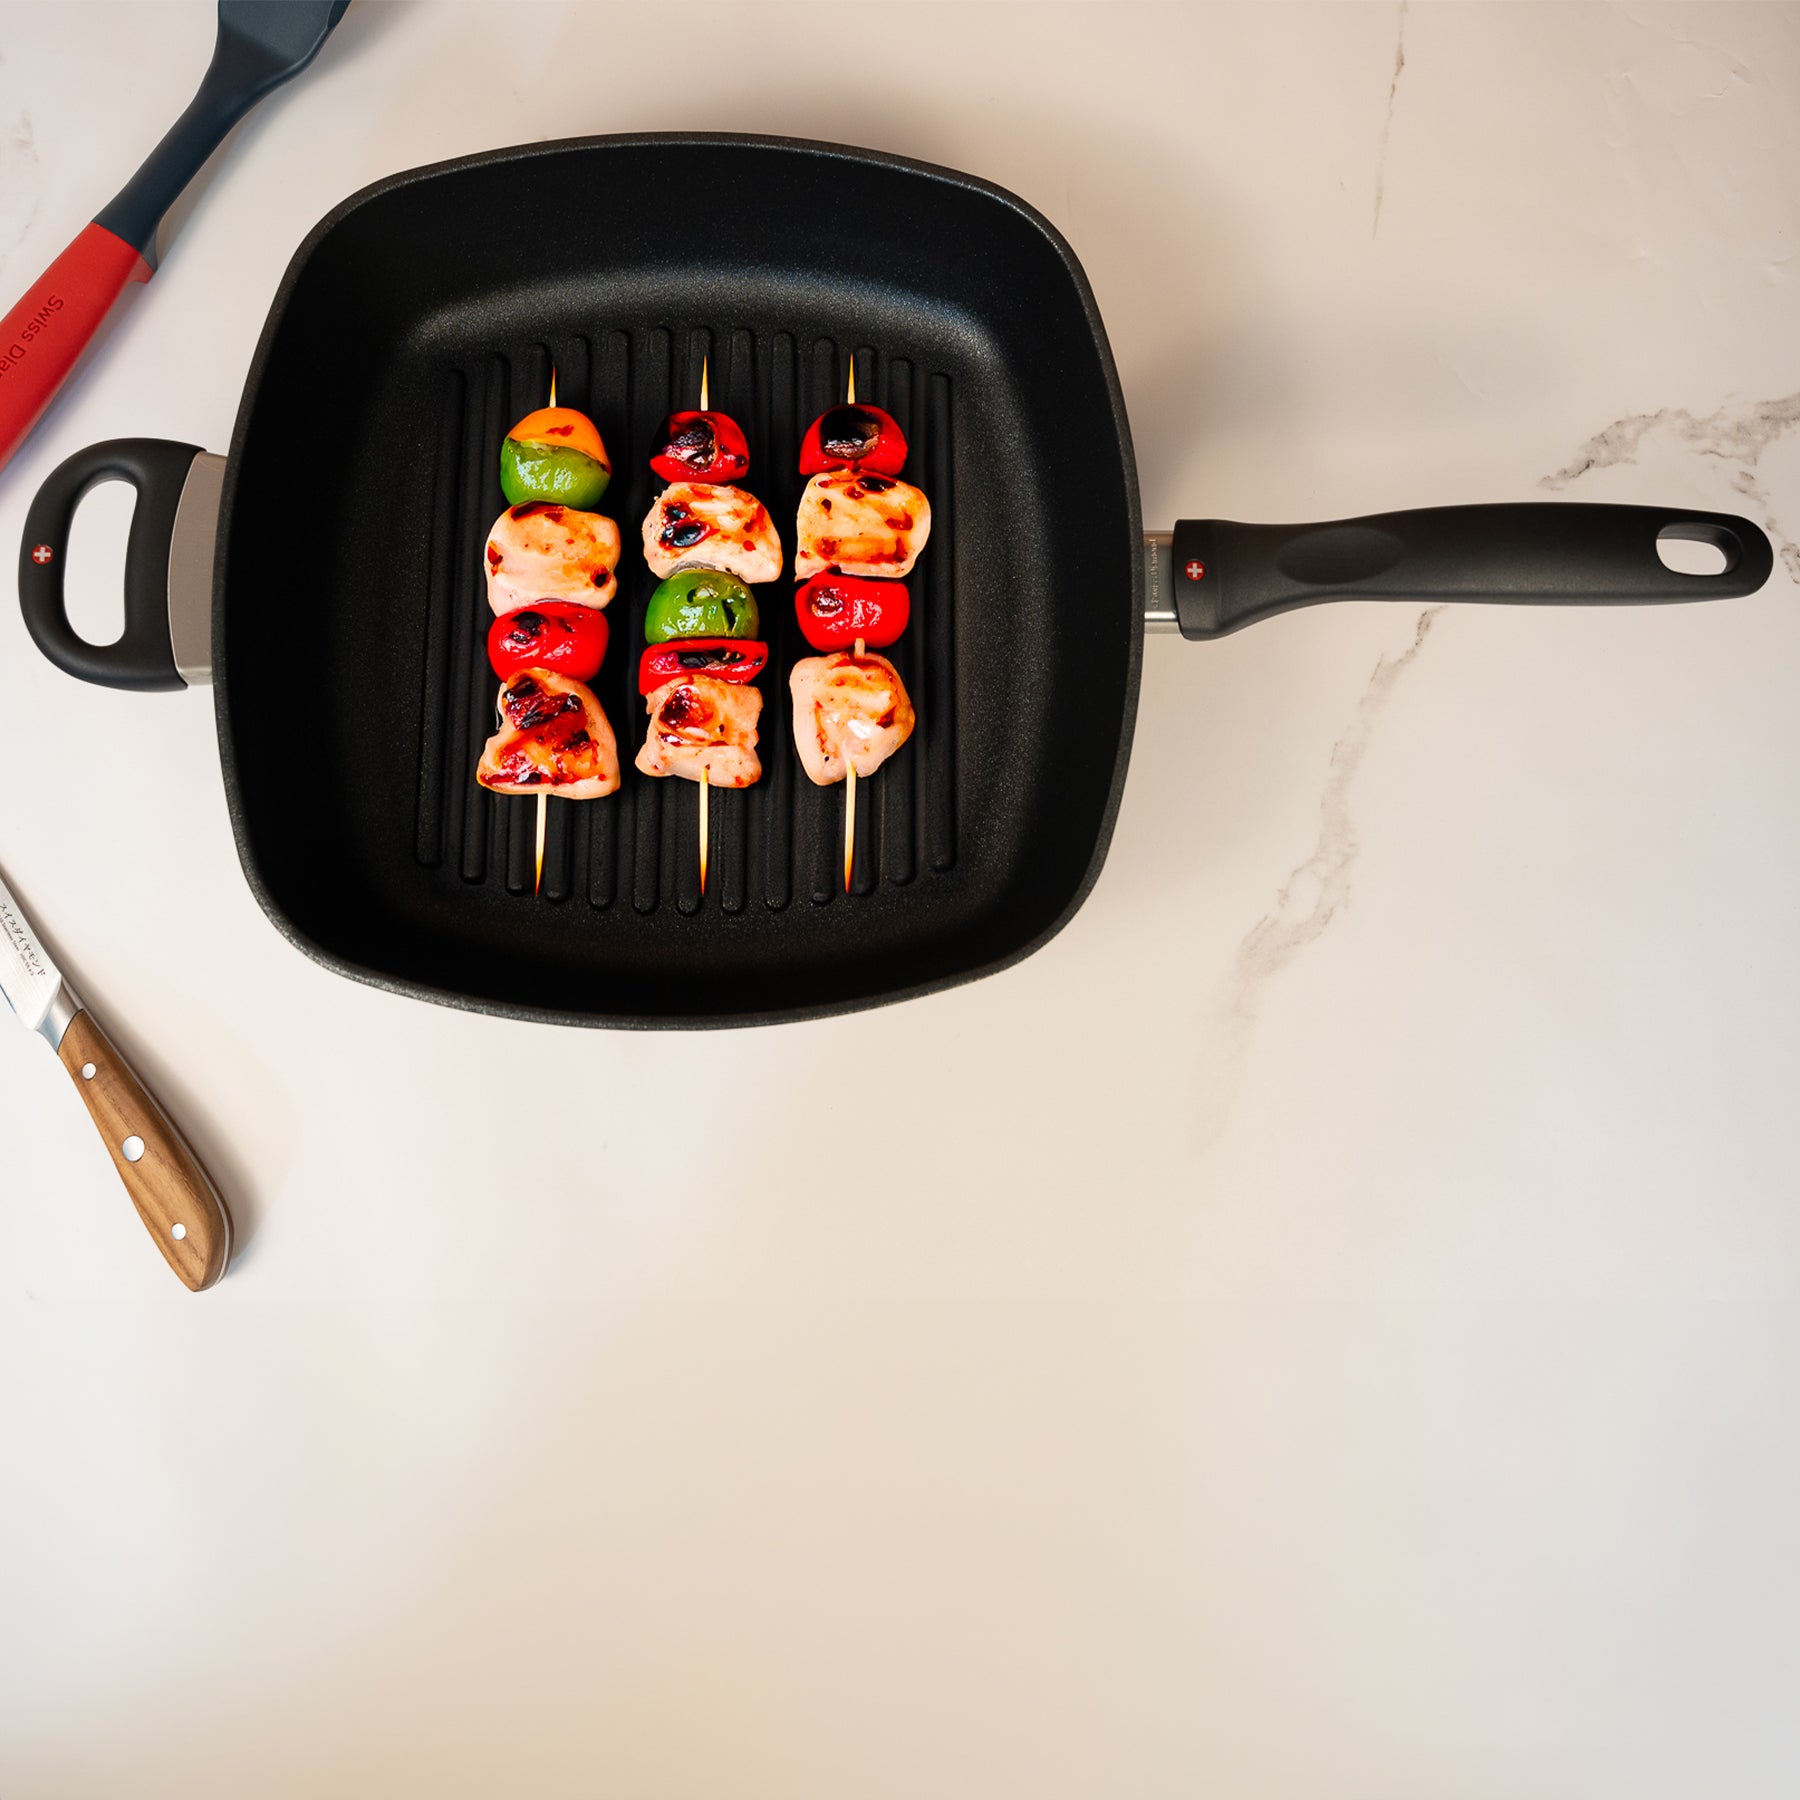 XD Nonstick 11" x 11" Deep Square Grill Pan - Induction in use with kabobs on surface